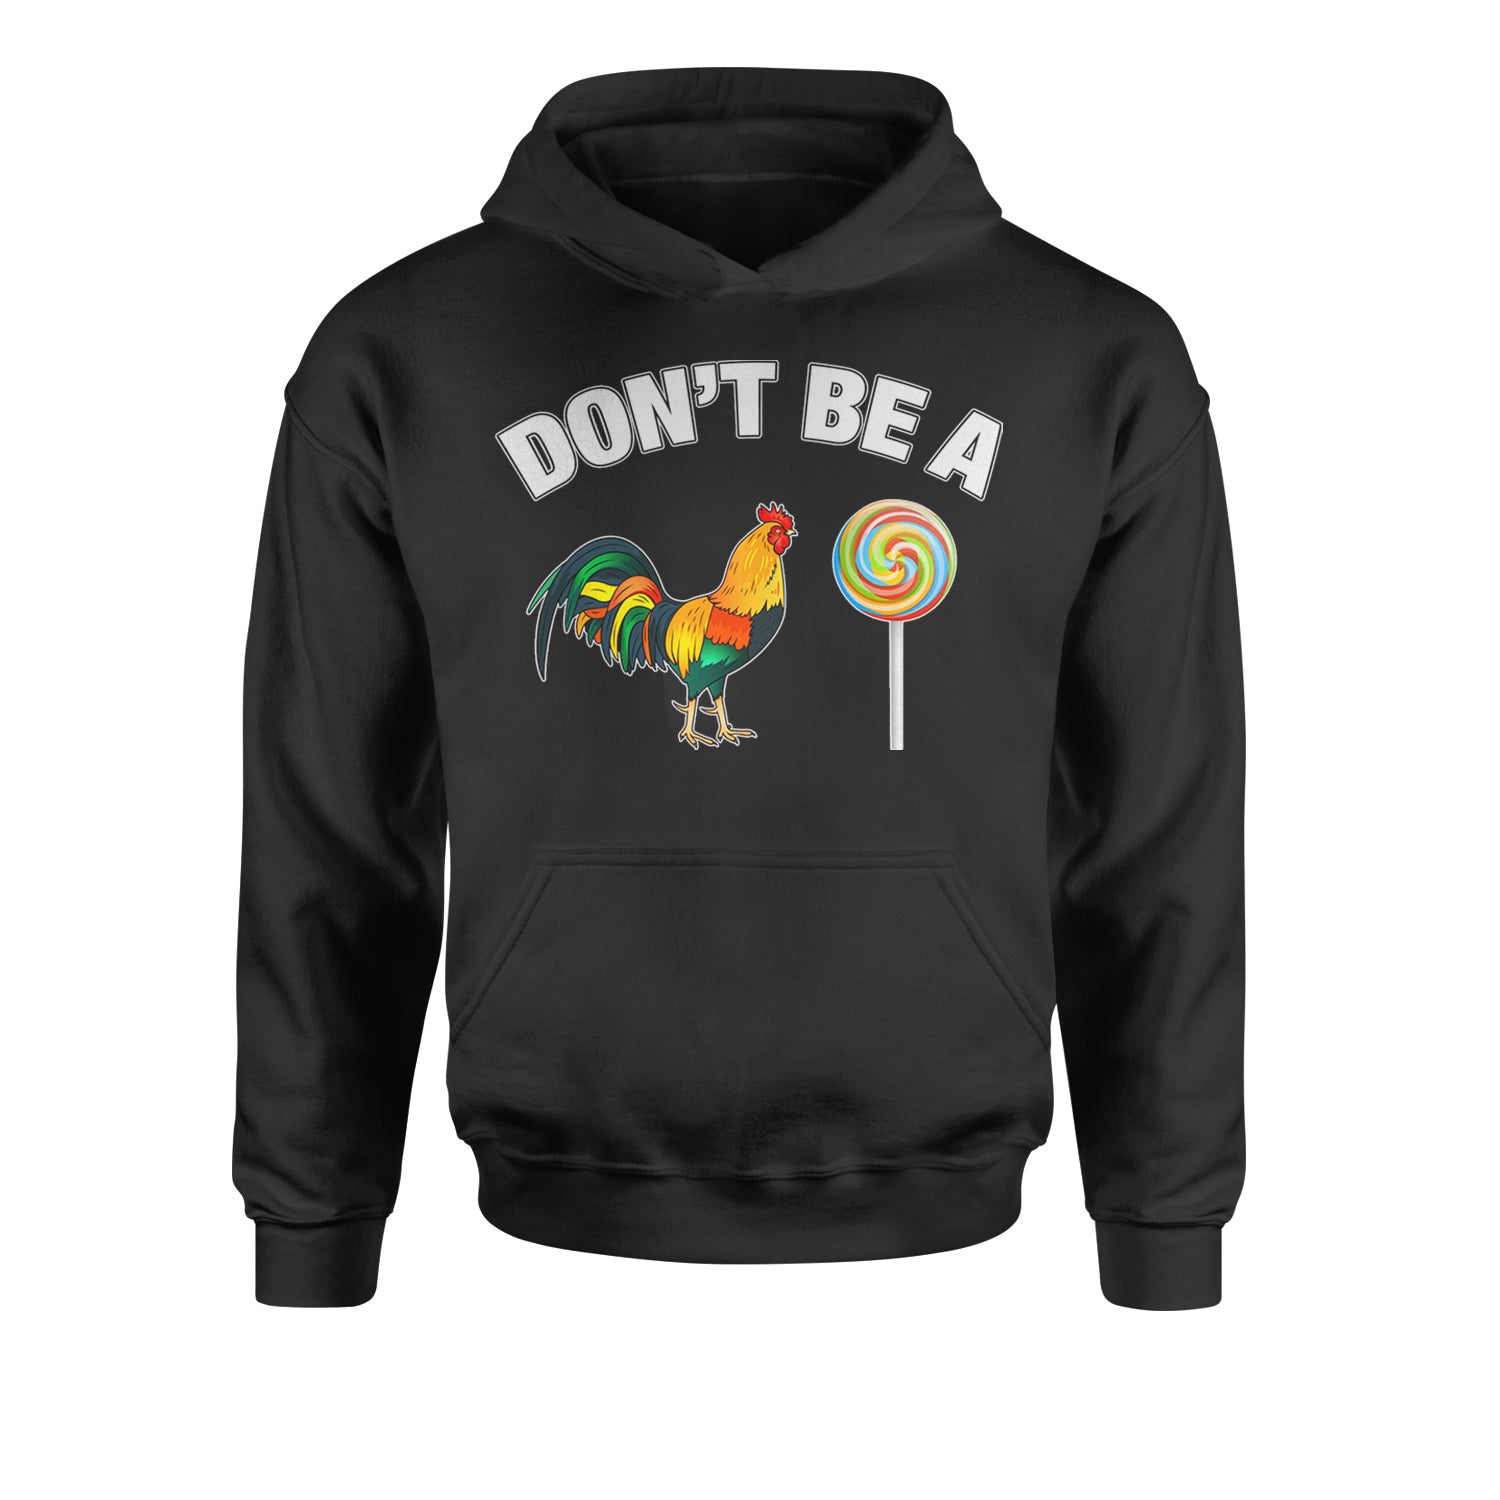 Don't Be A C-ck Sucker Funny Sarcastic Youth-Sized Hoodie